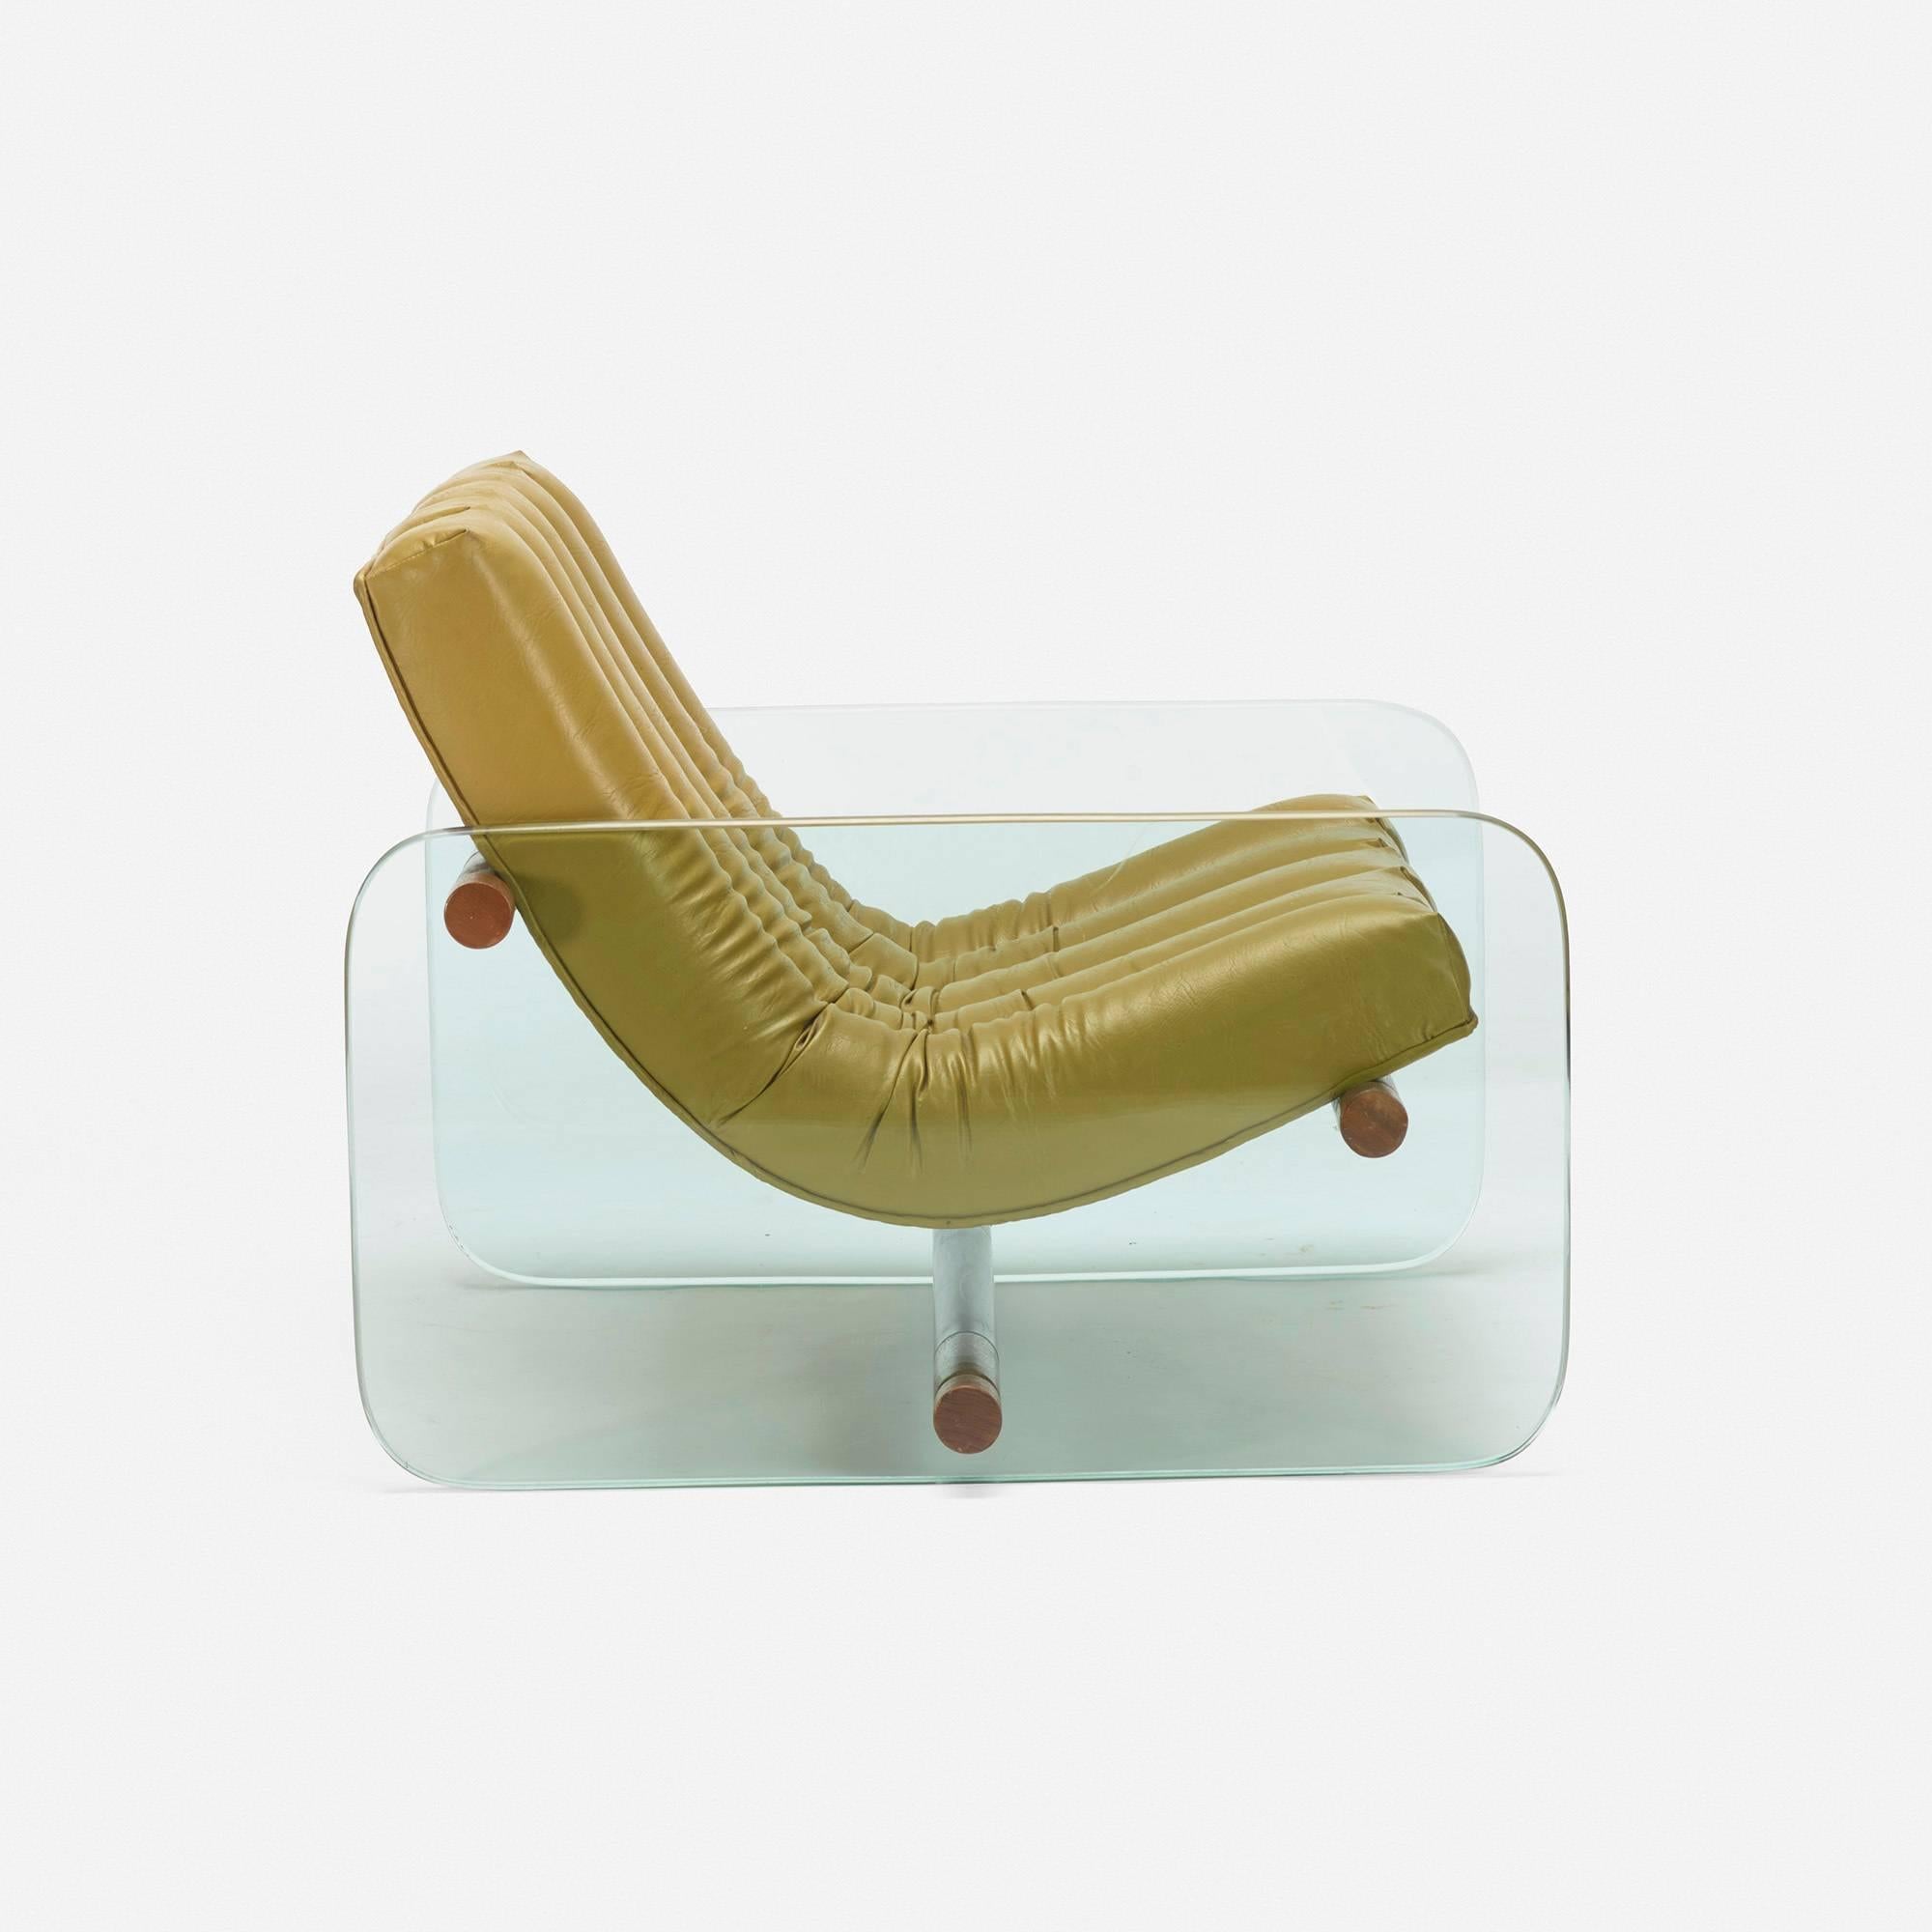 Lounge chair attributed to Fabio Lenci.